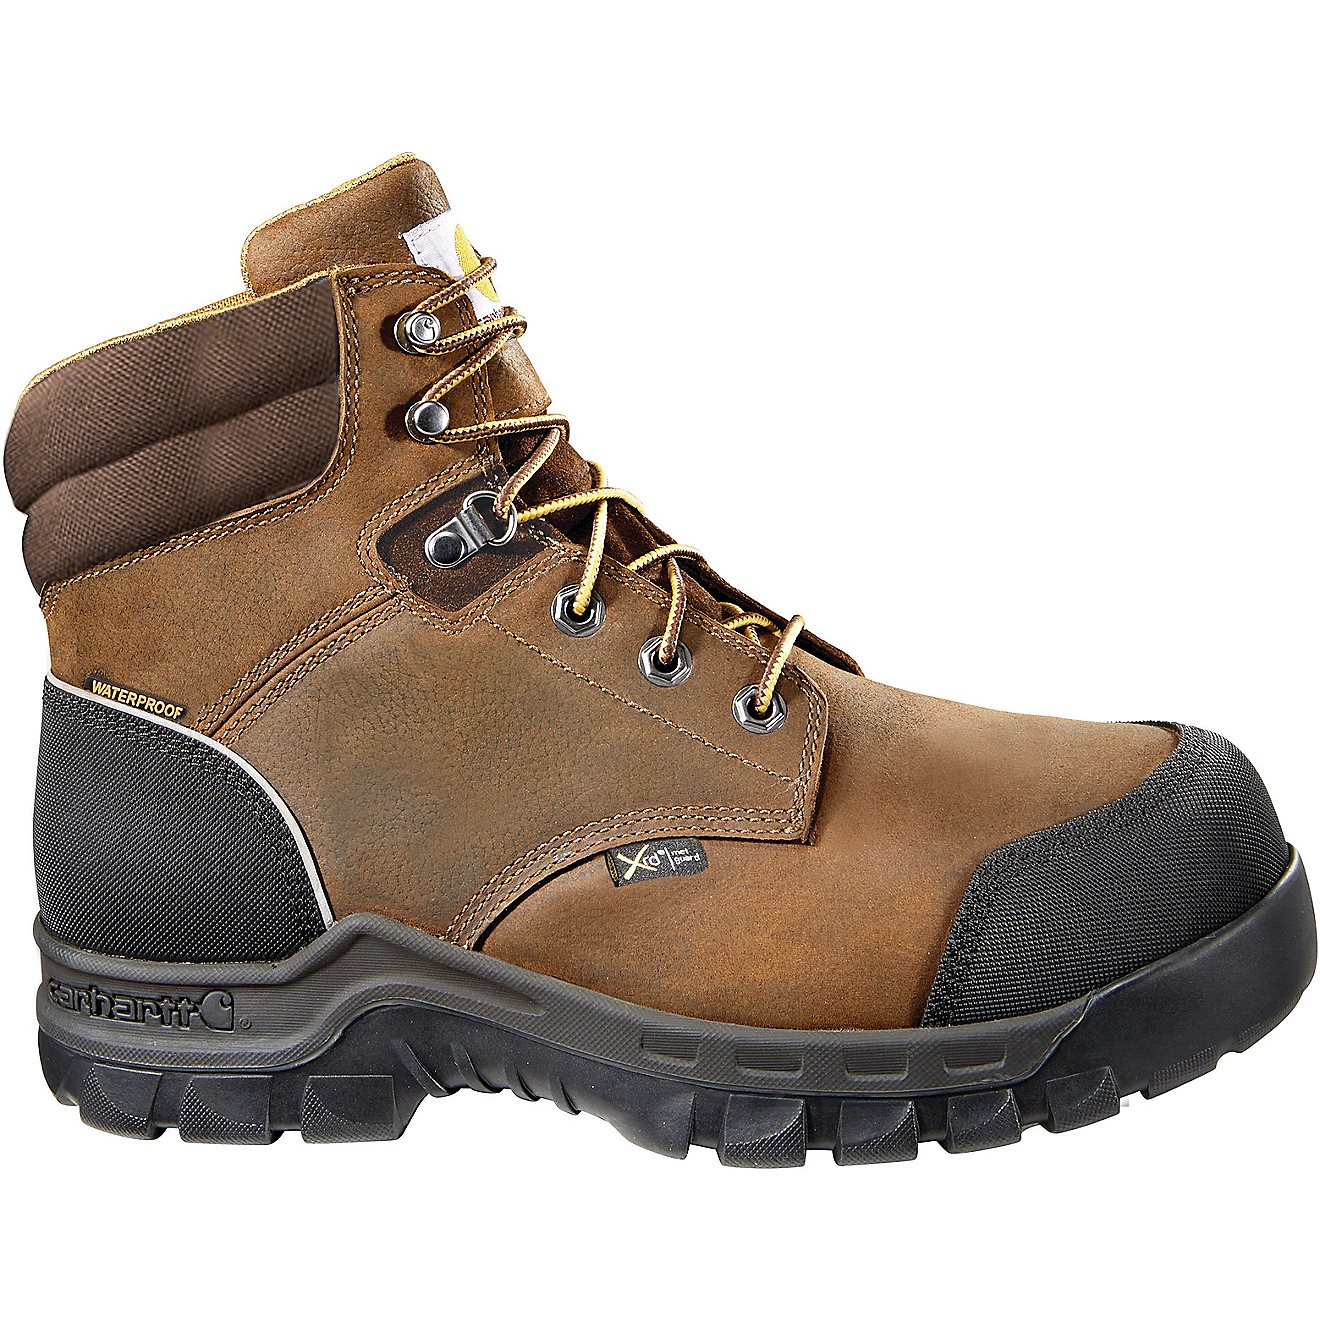 Carhartt Men's Rugged Flex Met Guard Composite Toe Lace Up Work Boots                                                            - view number 1